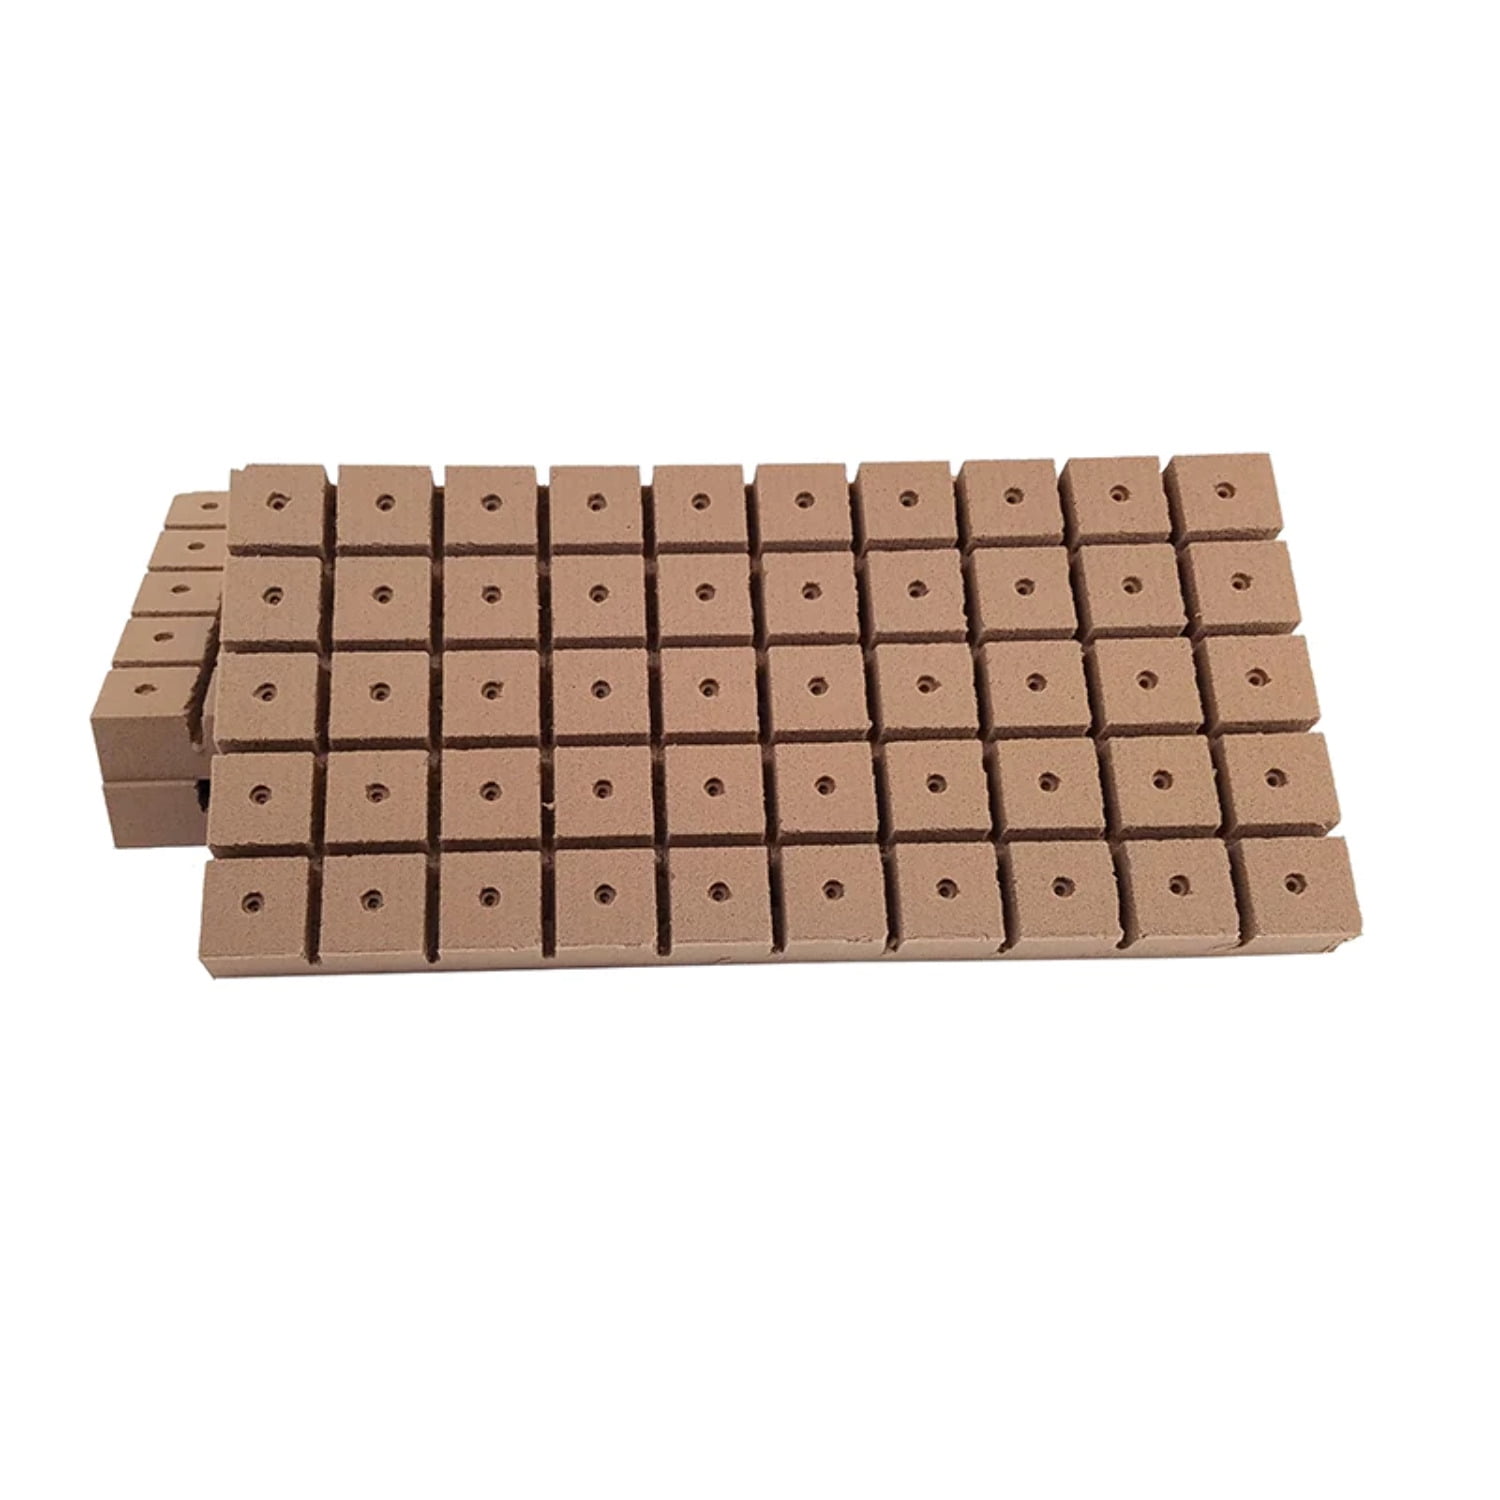 ODOMY 50Pcs Rock Wool Cubes,Rockwool Grow,Hydroponics Grow Cubes  Multifunction Greenhouse Compress Base for Cloning Plant Propagation and  Seed